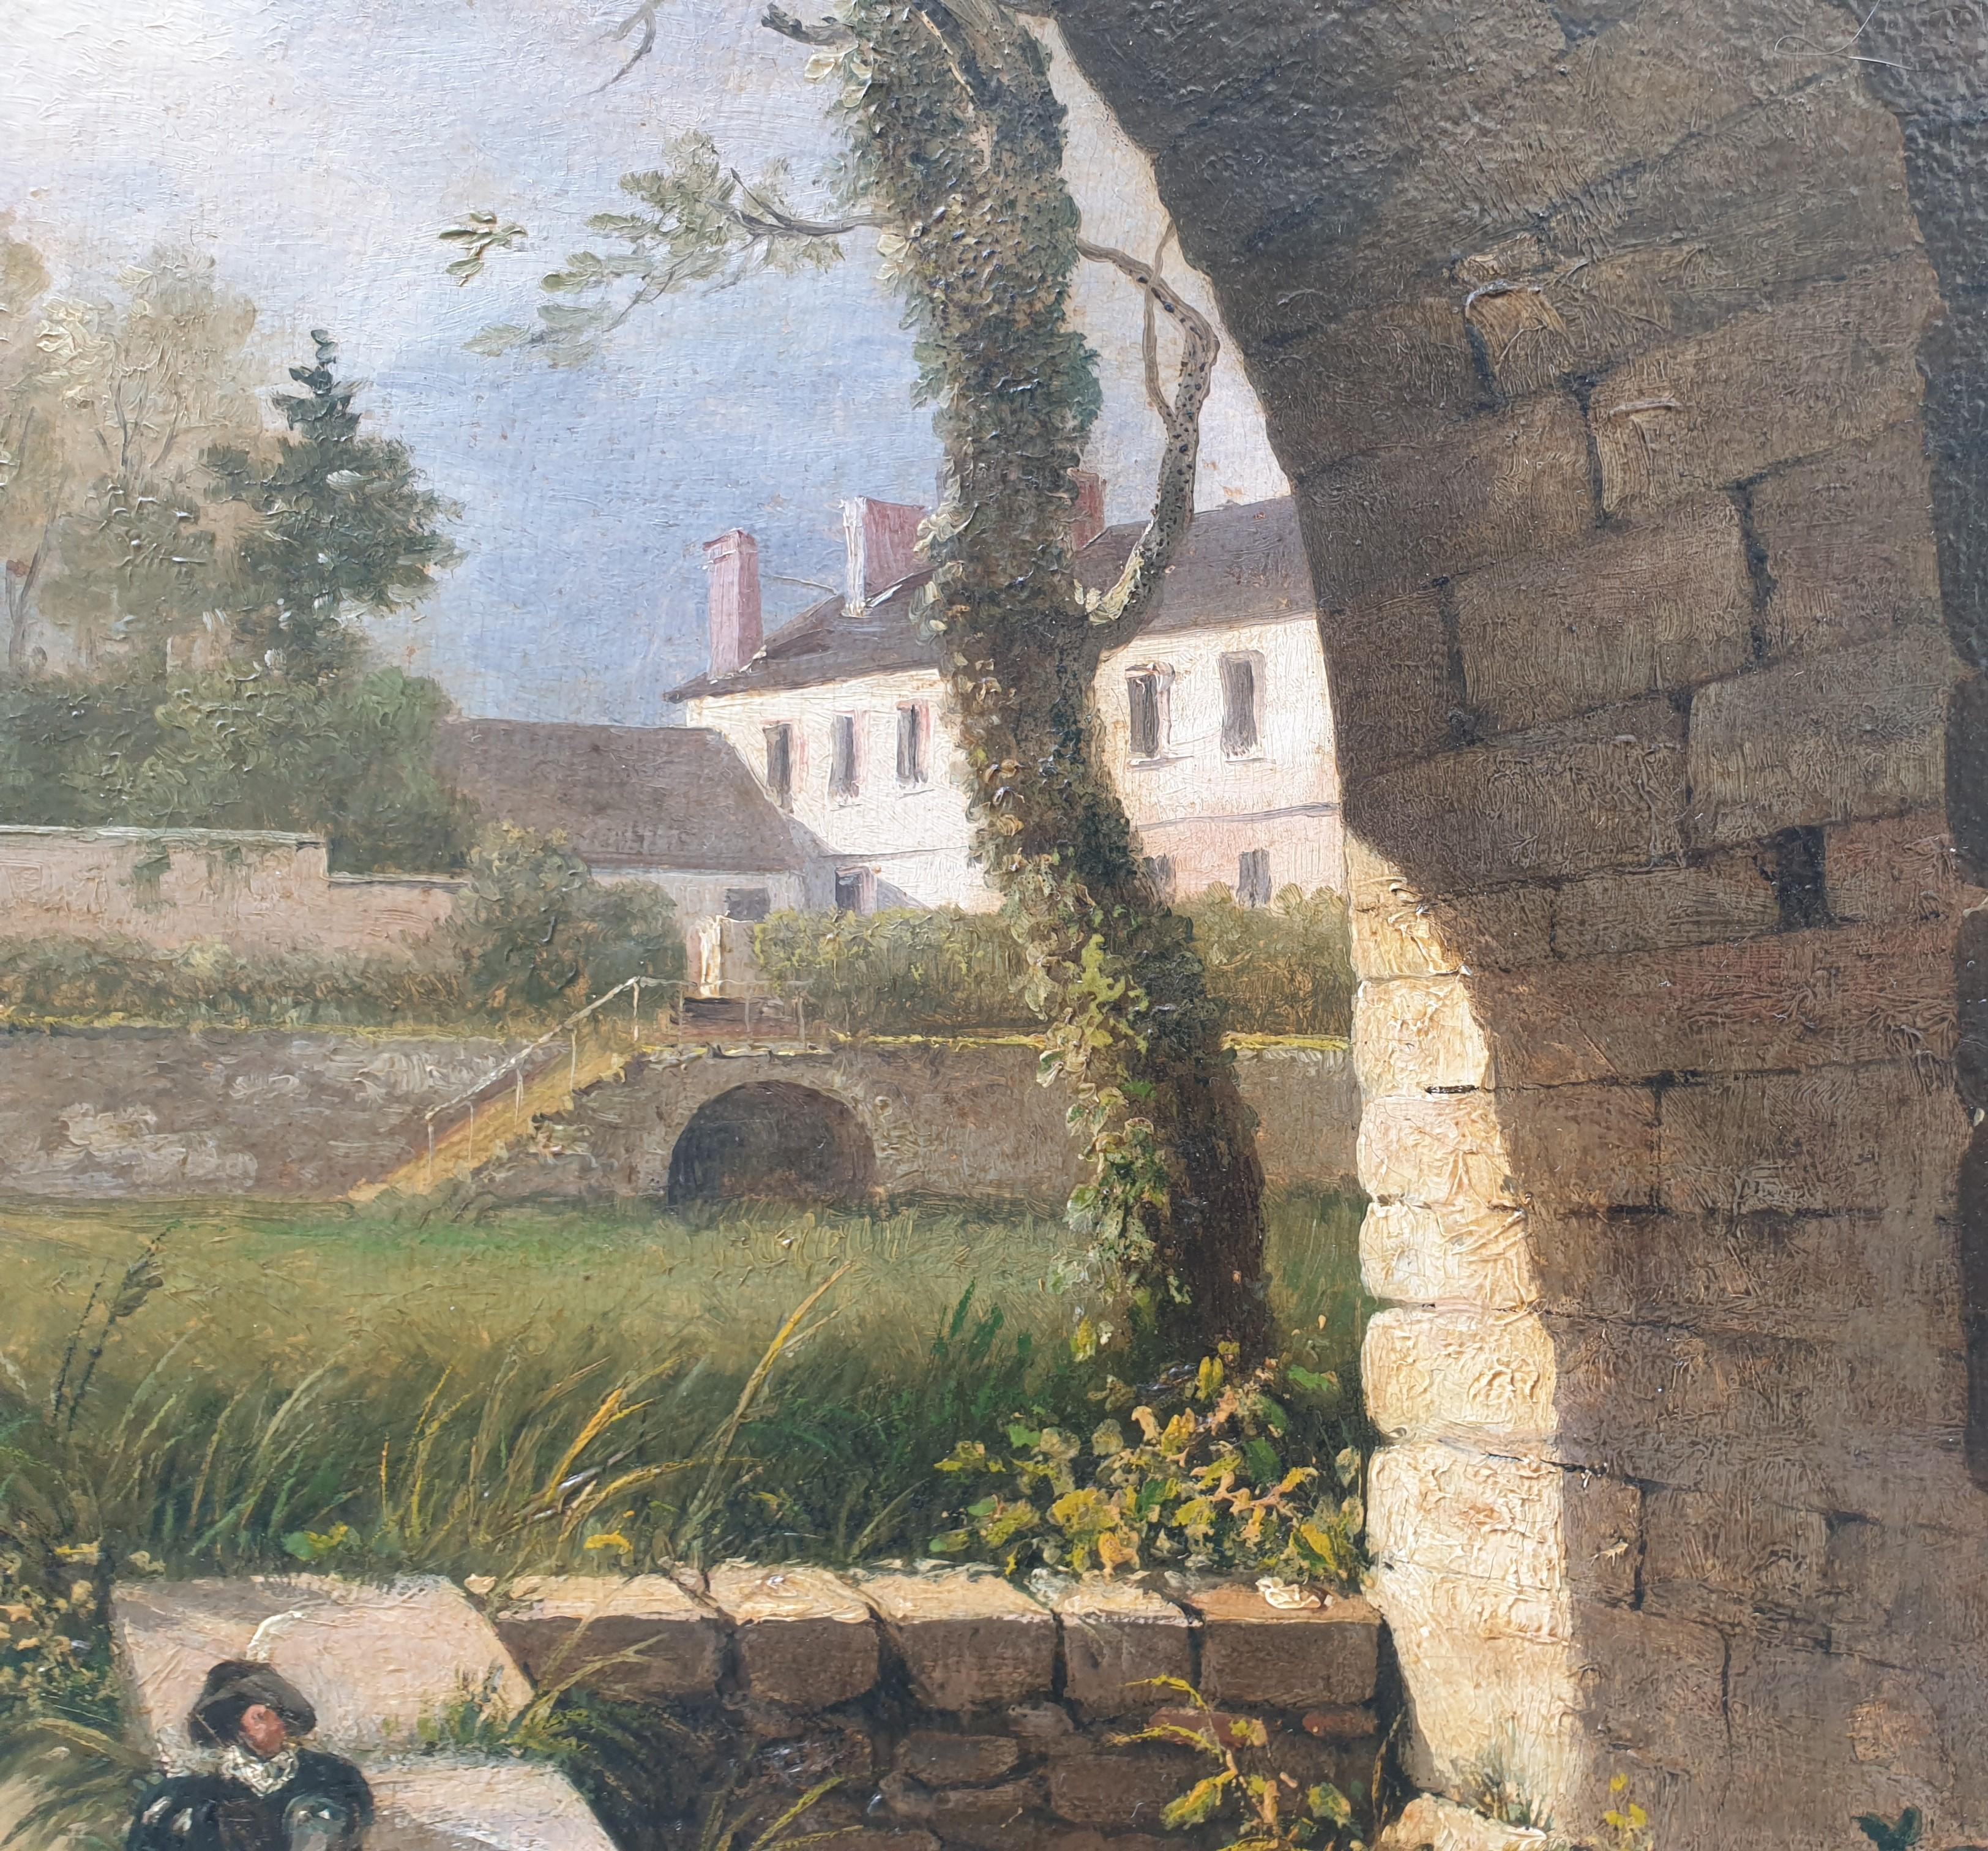 French school from the mid-19th century
Oil on paper
33 x 46 cm (37 x 51 cm with the frame)
Inscription on the verso  